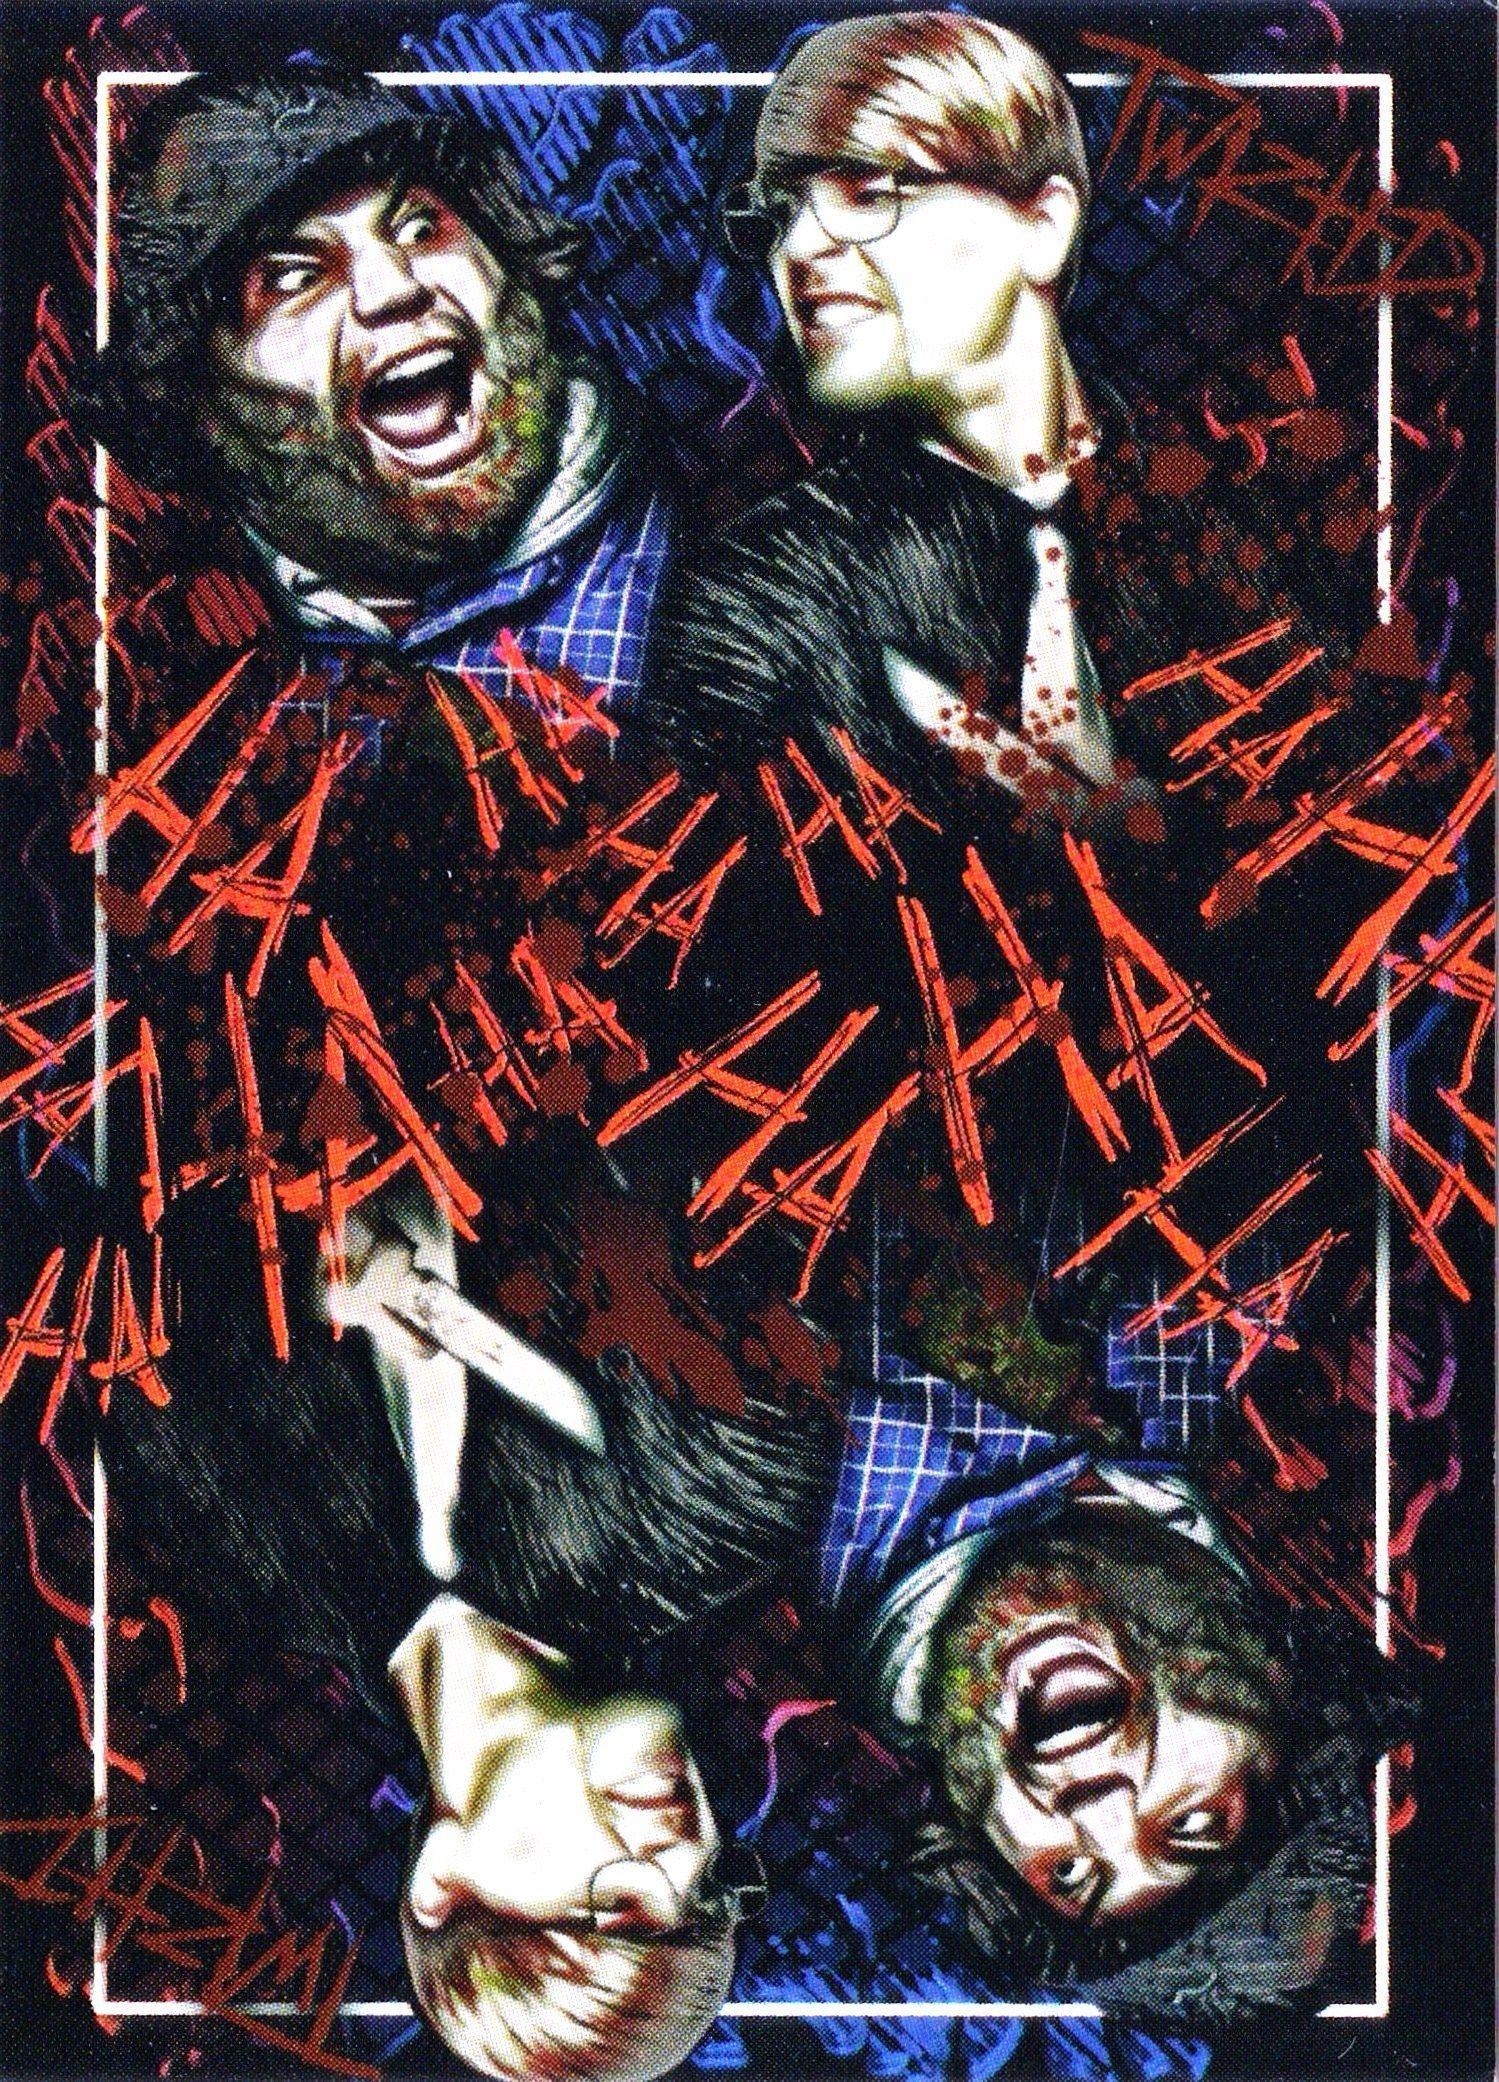 New Psychopathic Trading Cards (Partial Set)